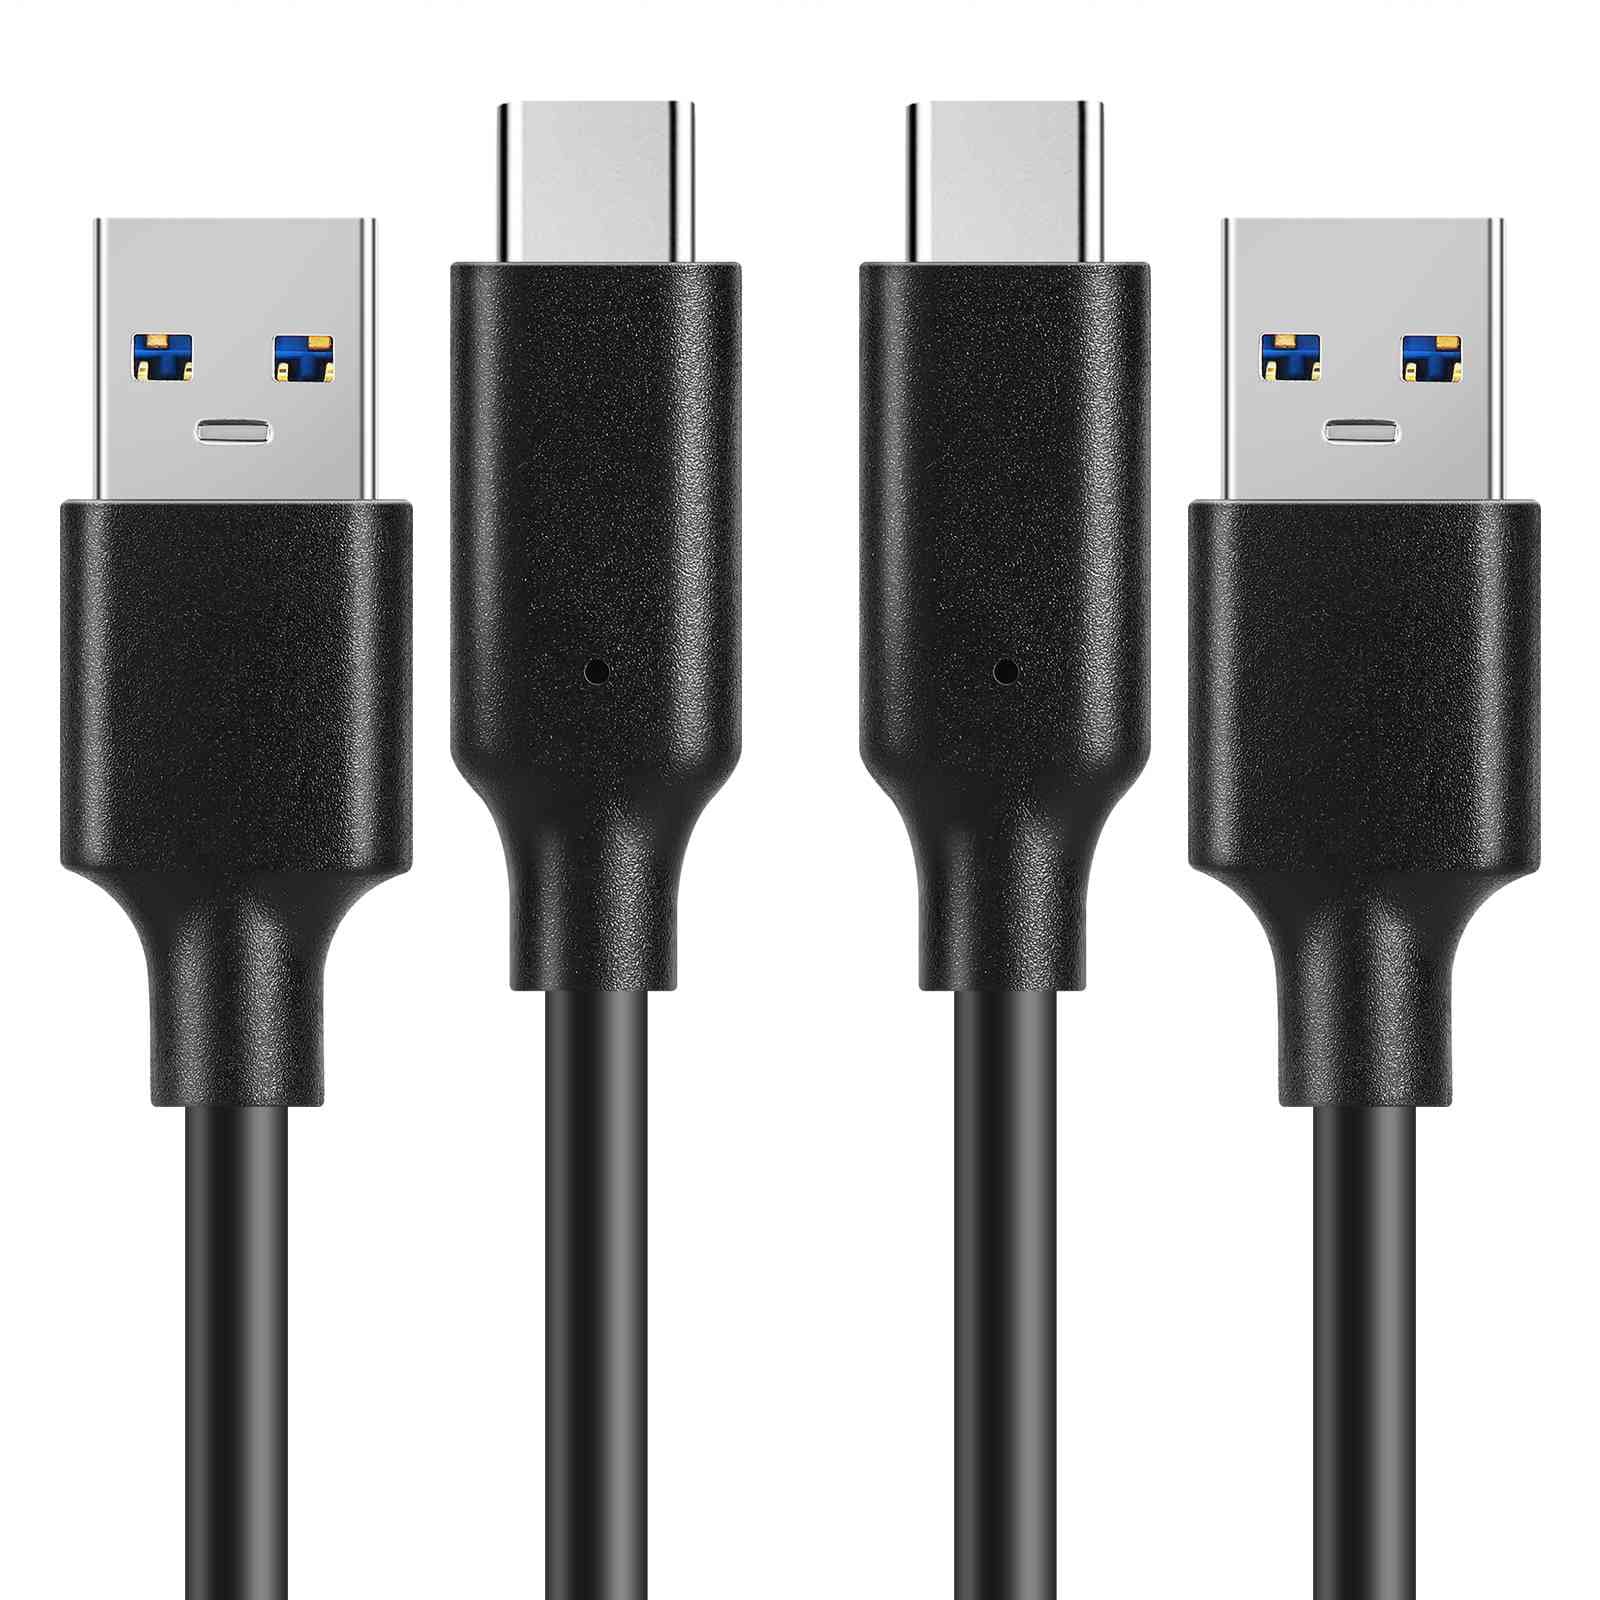 [Latest Edition] UrbanX (2-Pack) USB C Android Auto Cable for Magic4 , 3.3FT, 10Gbps, USB C 3.1 Gen 2 USB-A, 3A Type C Charger Fast Charging Sync Data Transfer Cord